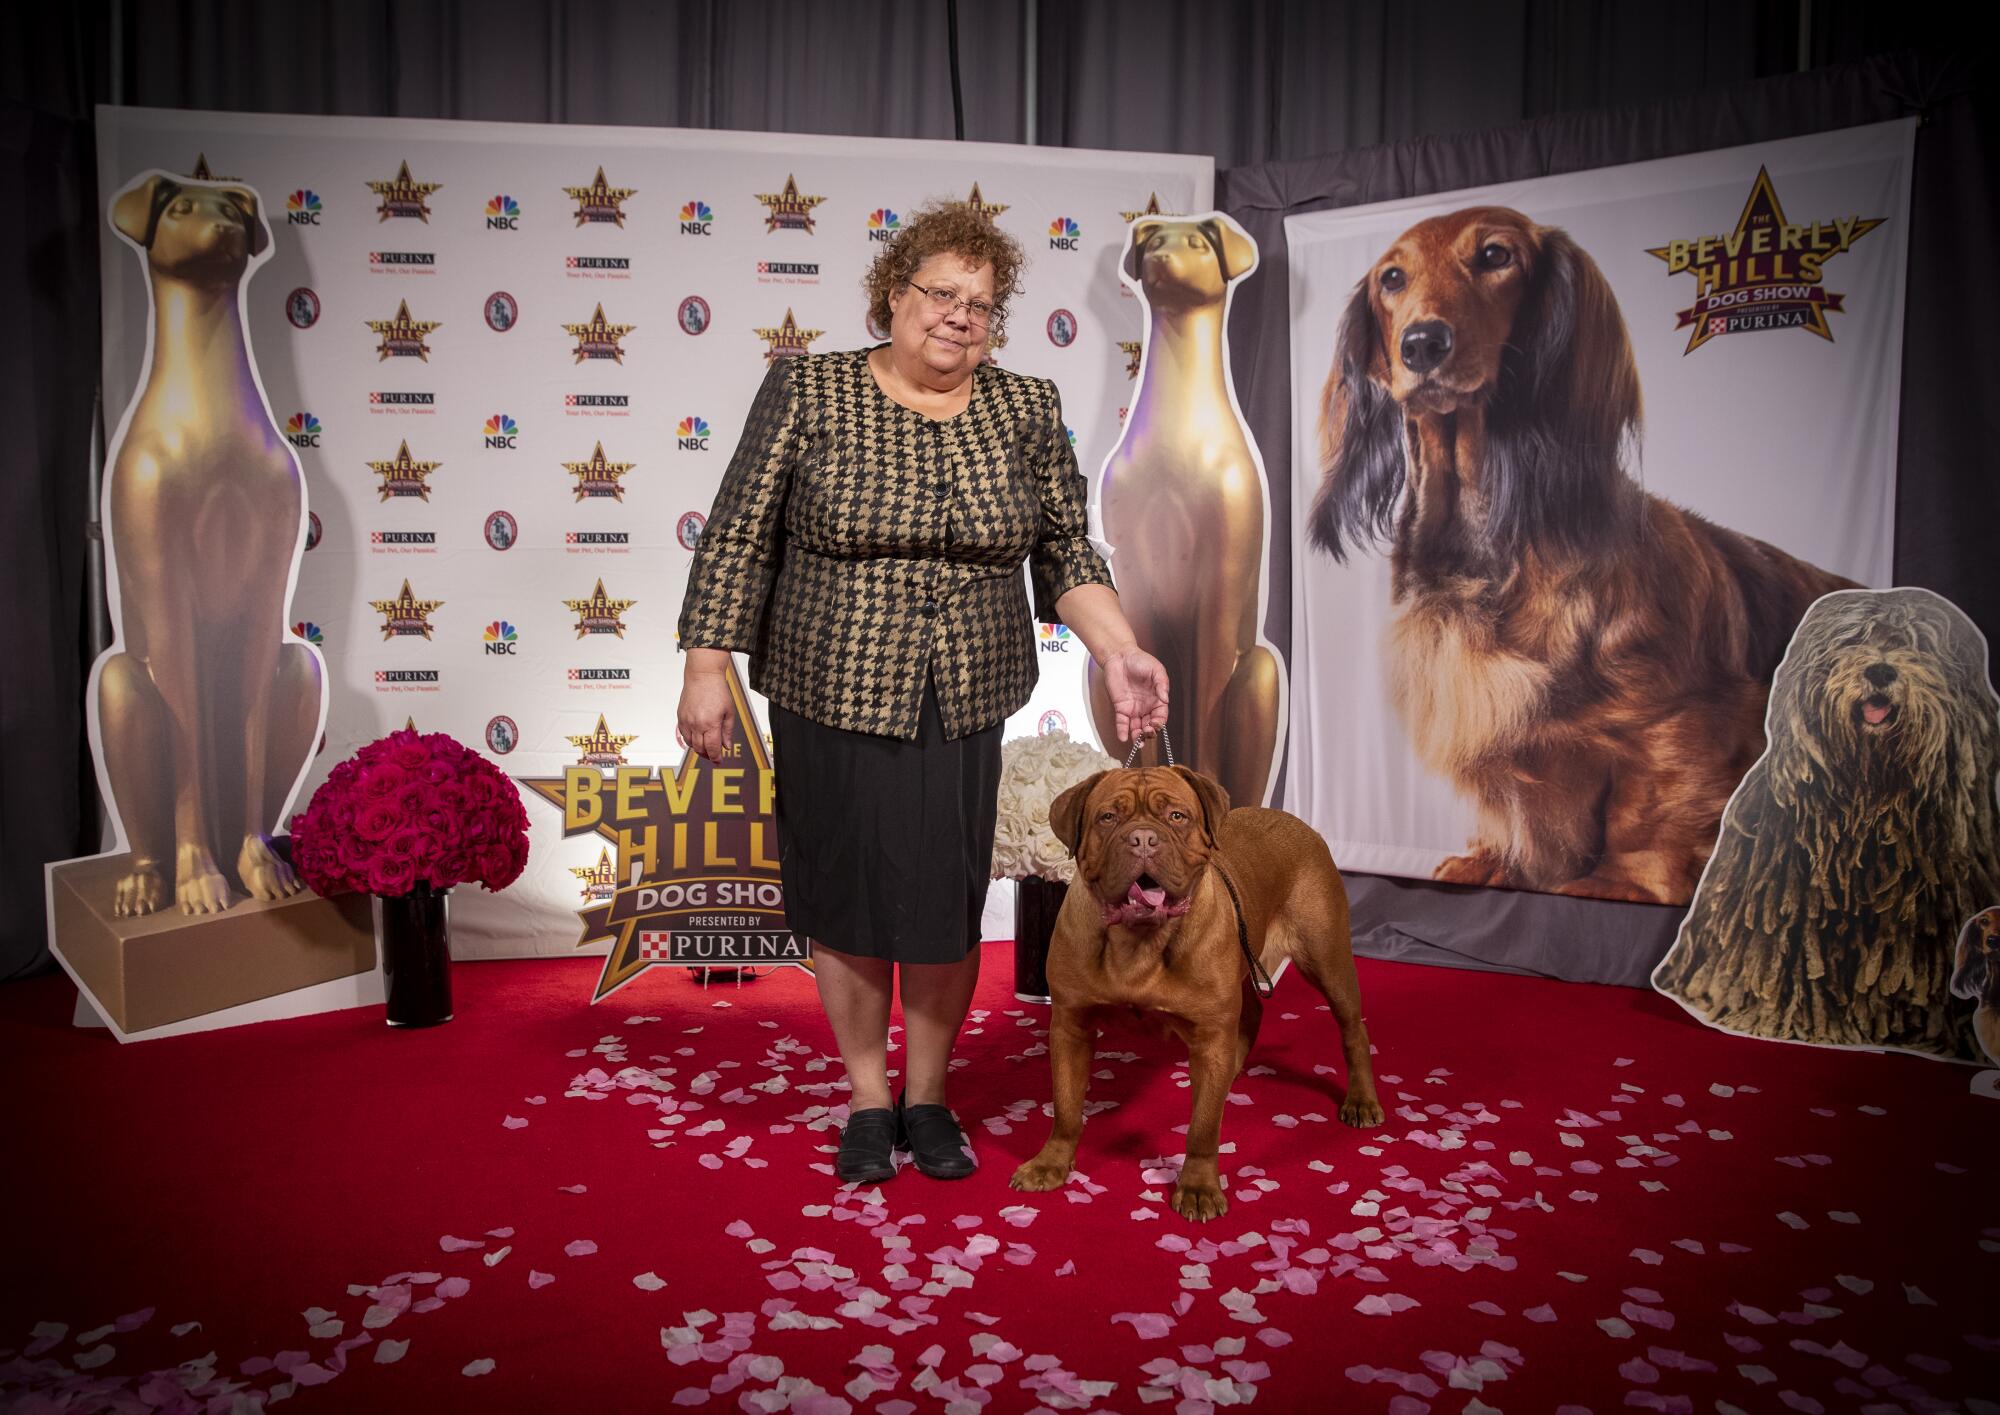 Vi Harrison, 61, of Benson, Ariz., poses with her 19-month-old Dogue de Bordeaux call-named "Rowling" from Sweden, officially named Grande Bulls Bellatrix Lestrange.